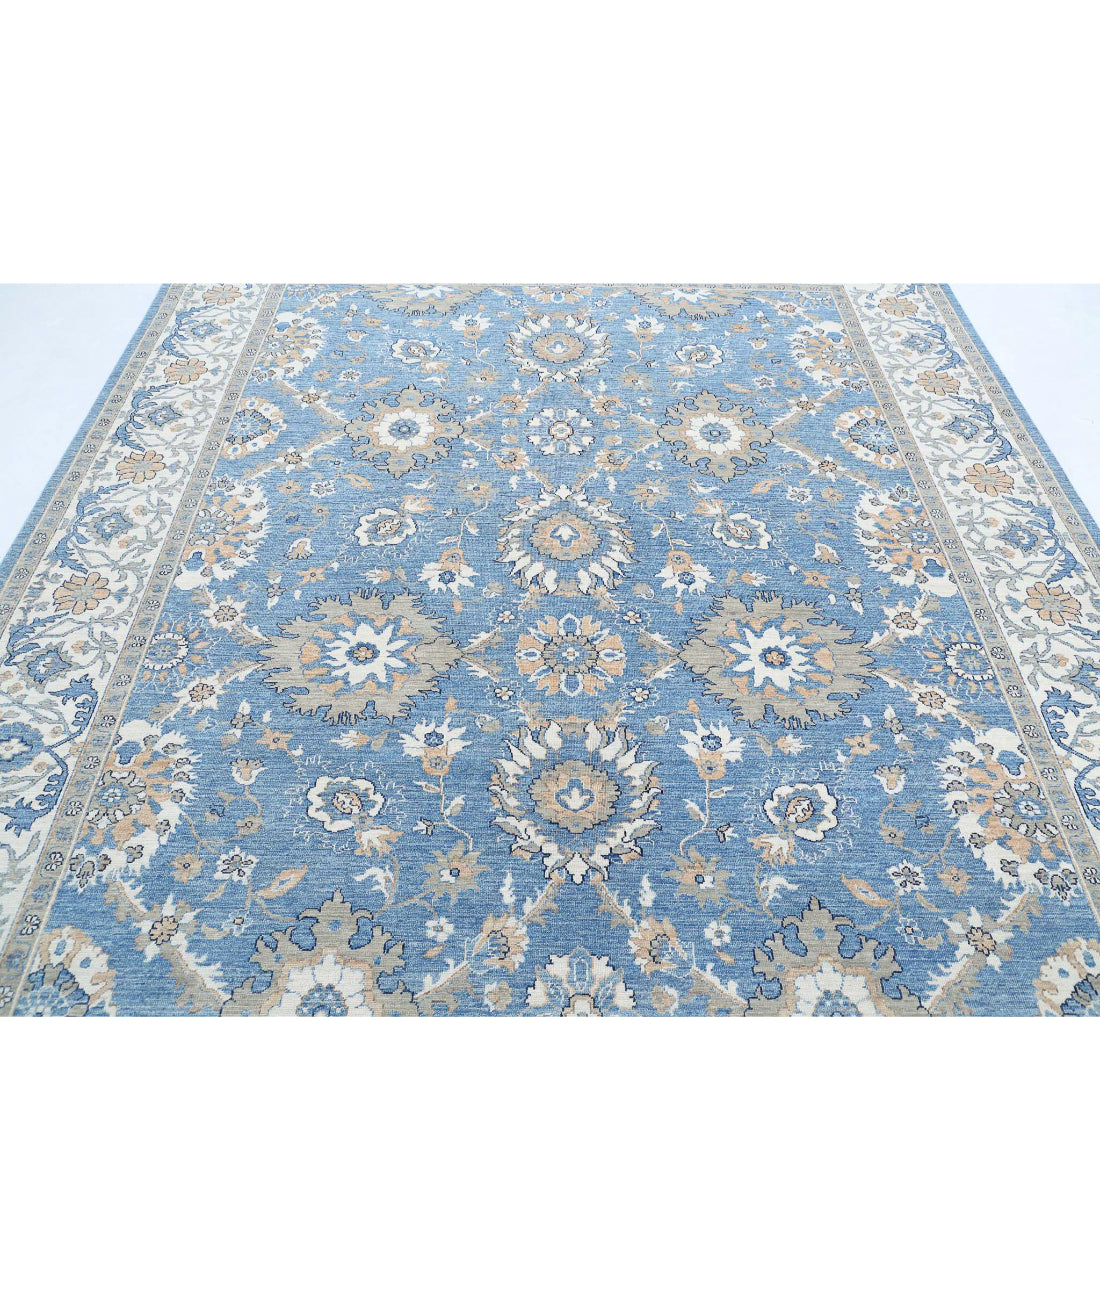 Ziegler 8'2'' X 9'10'' Hand-Knotted Wool Rug 8'2'' x 9'10'' (245 X 295) / Blue / Ivory